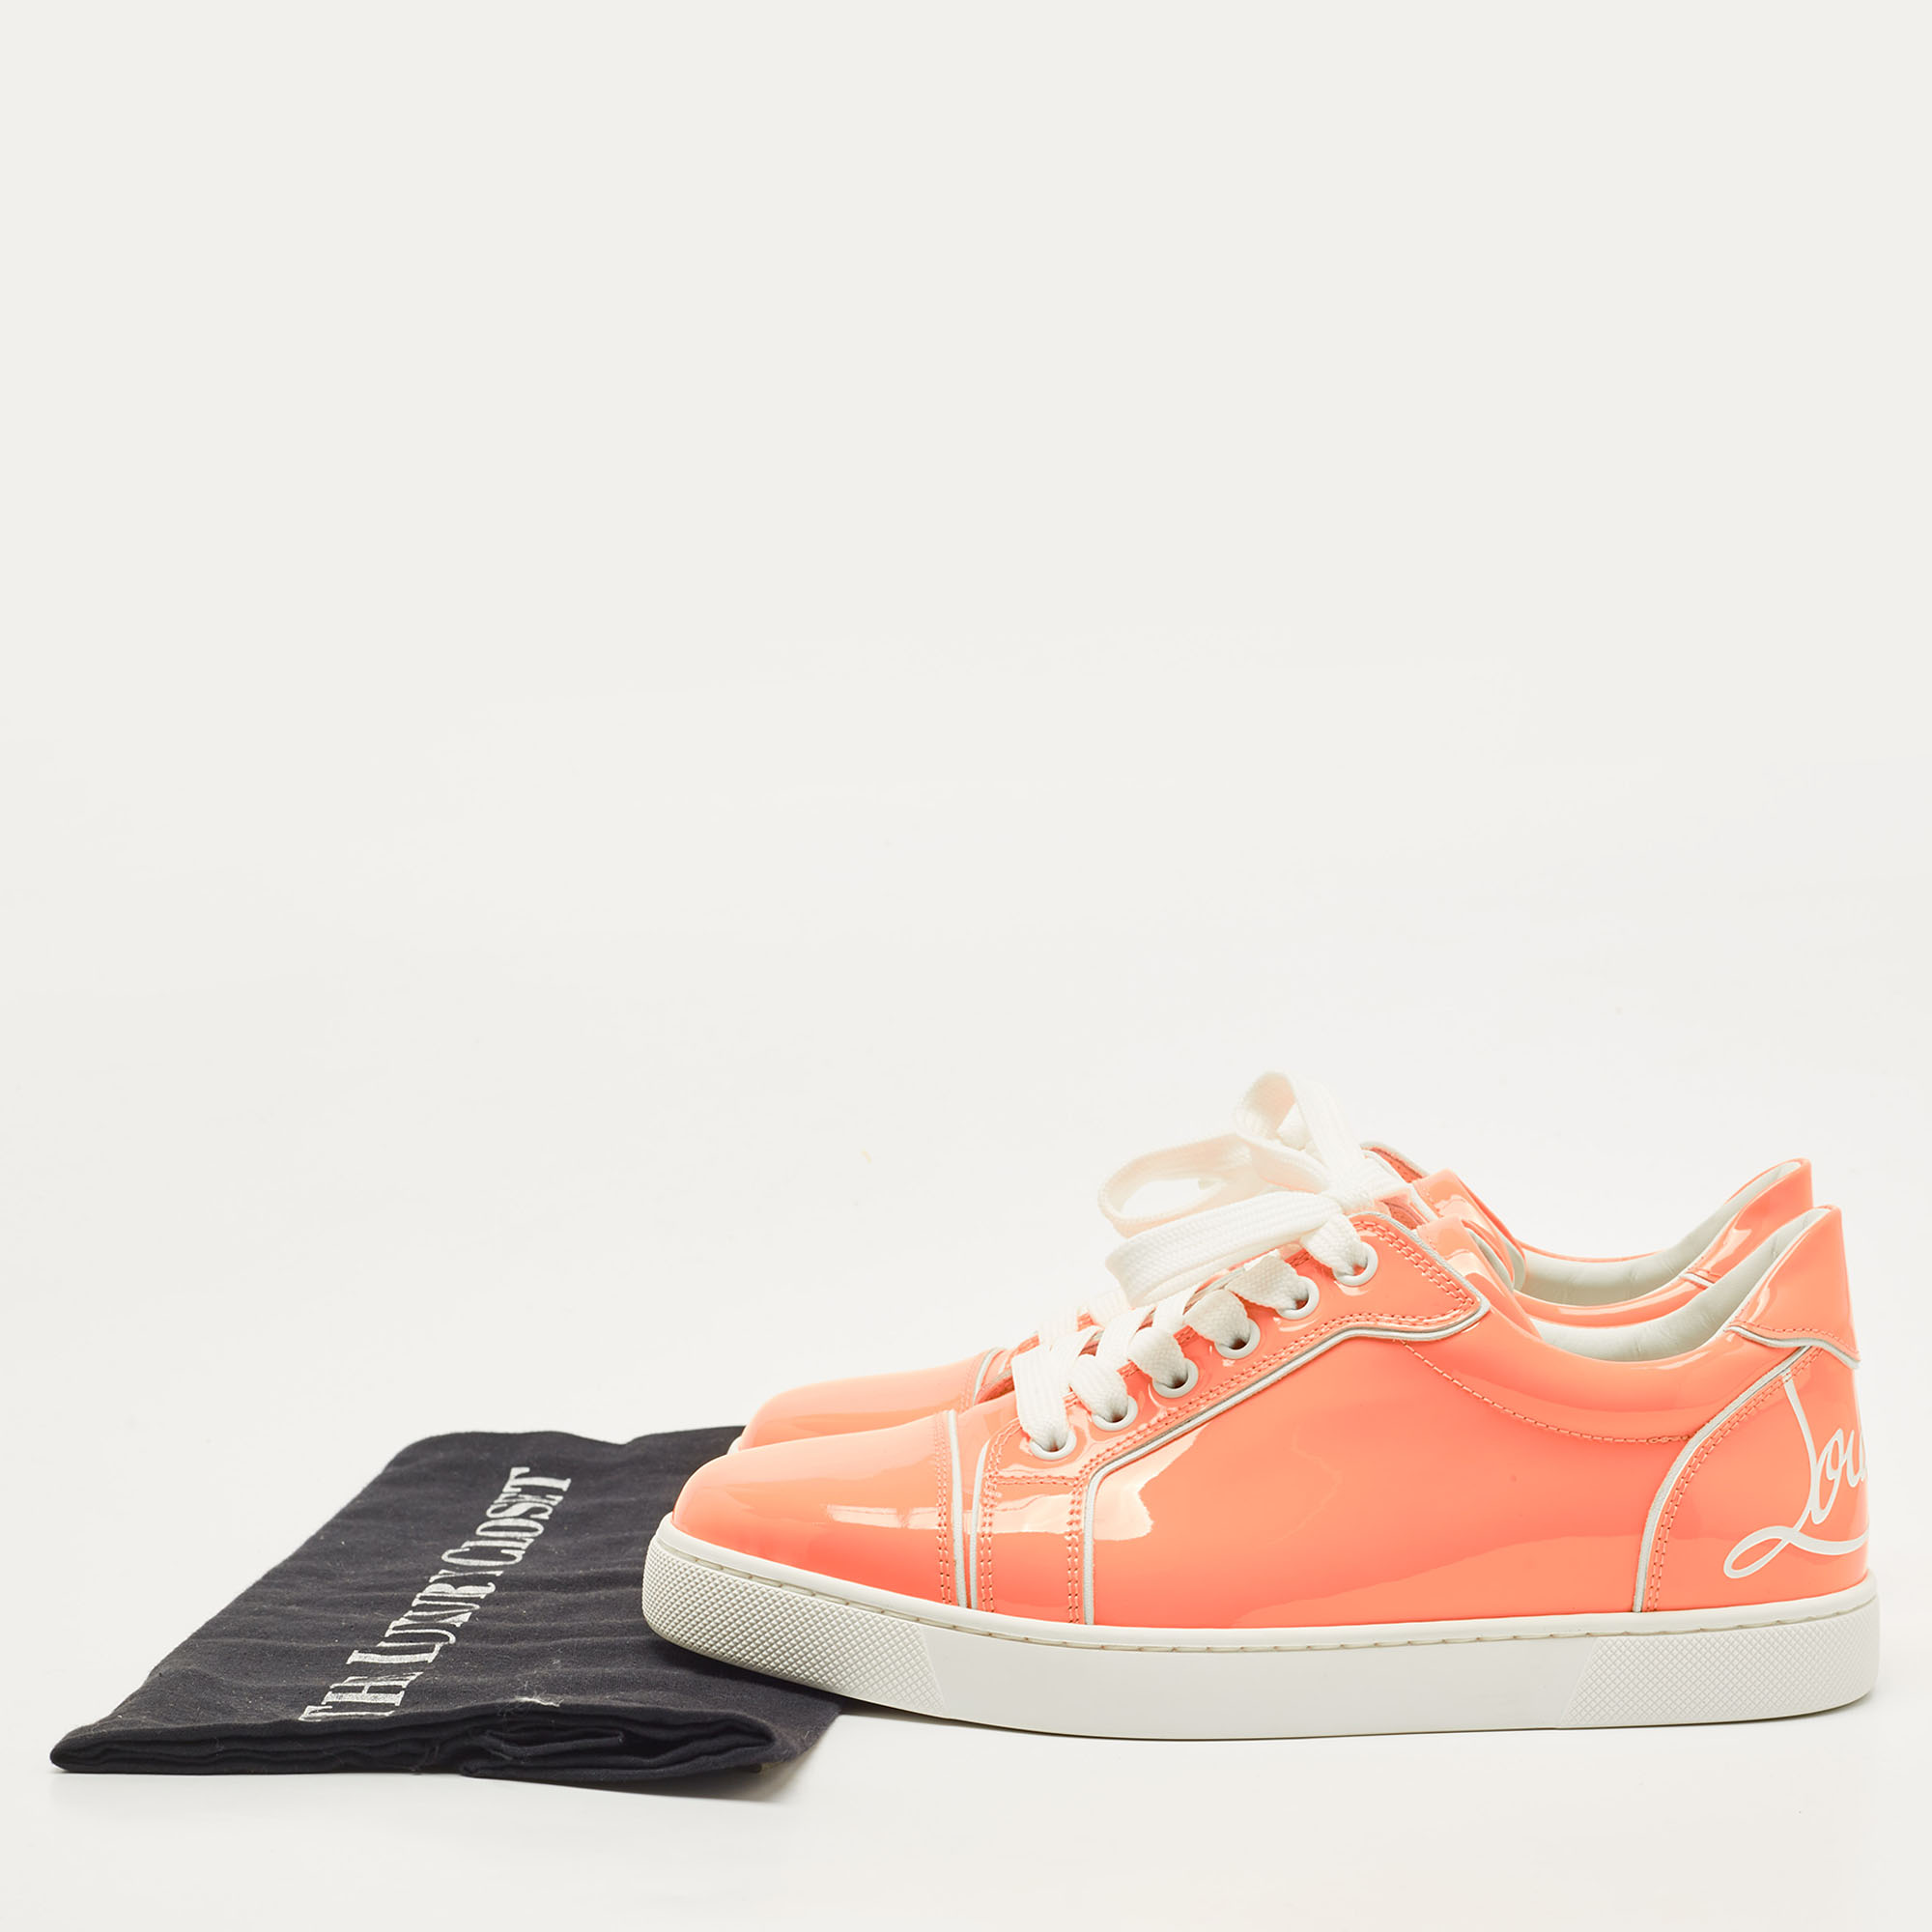 Christian Louboutin Neon Peach Patent Leather Louis Junior Low Top Sneakers Size 37